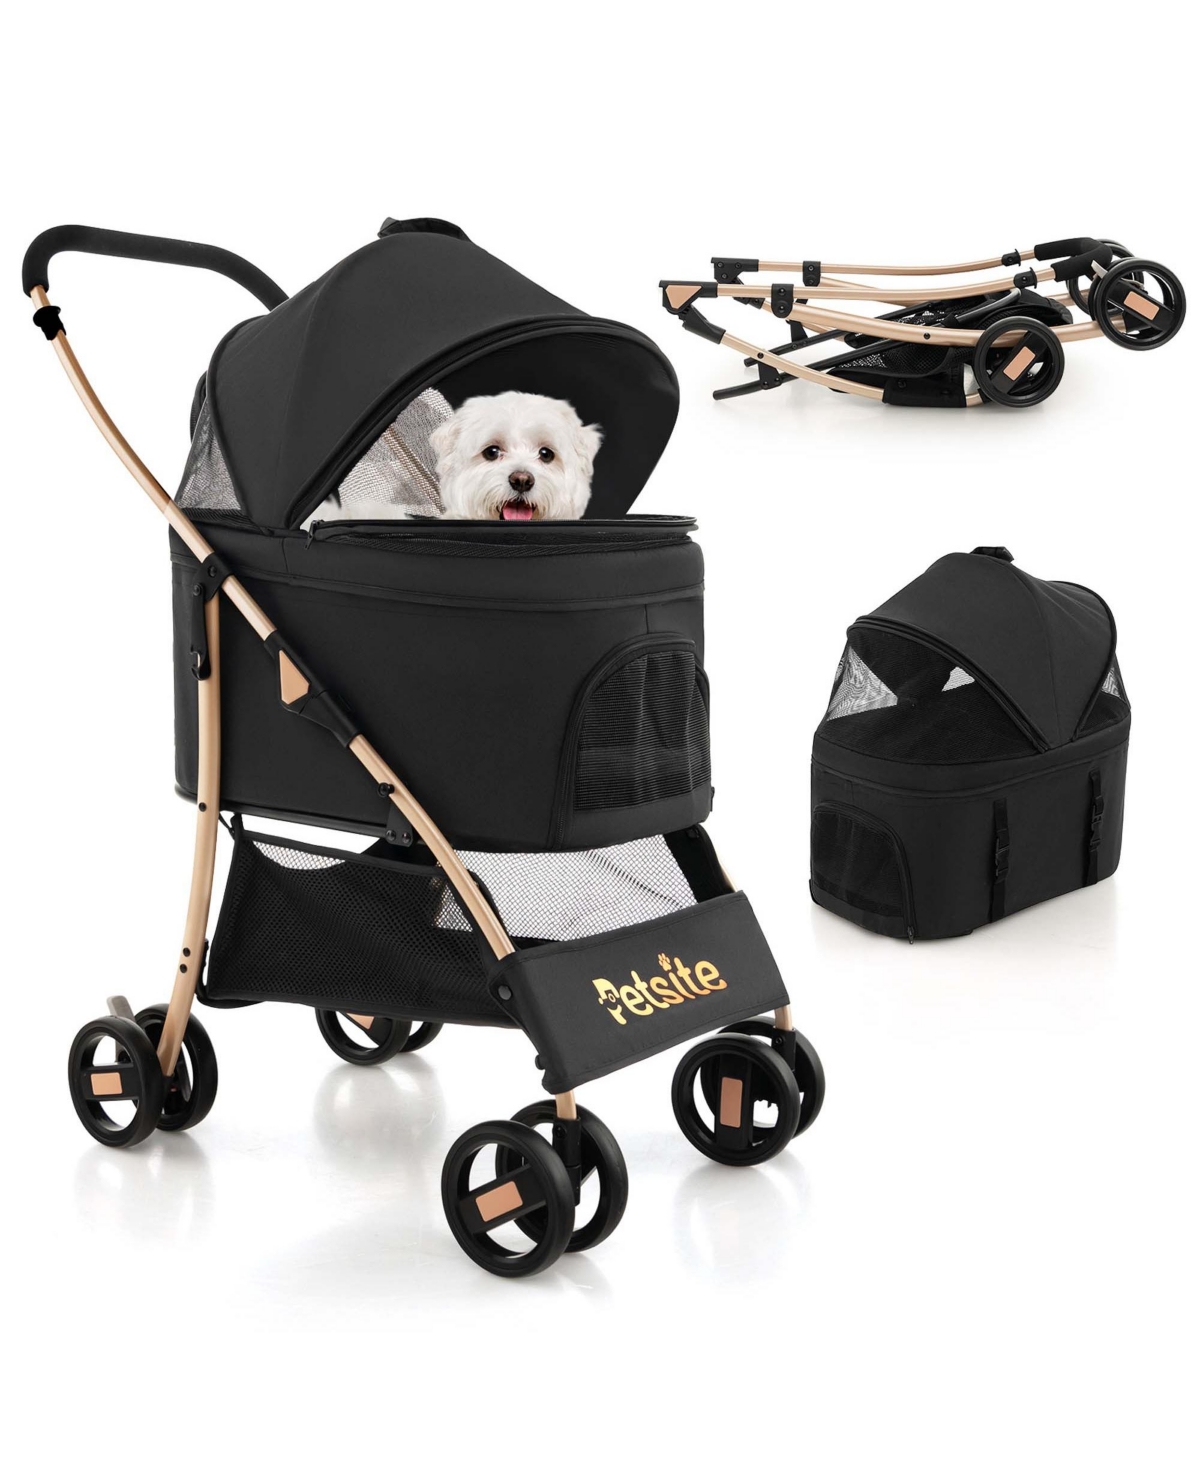 3-In-1 Pet Stroller with Removable Car Seat Carrier 4-Level Adjustable Canopy - Black